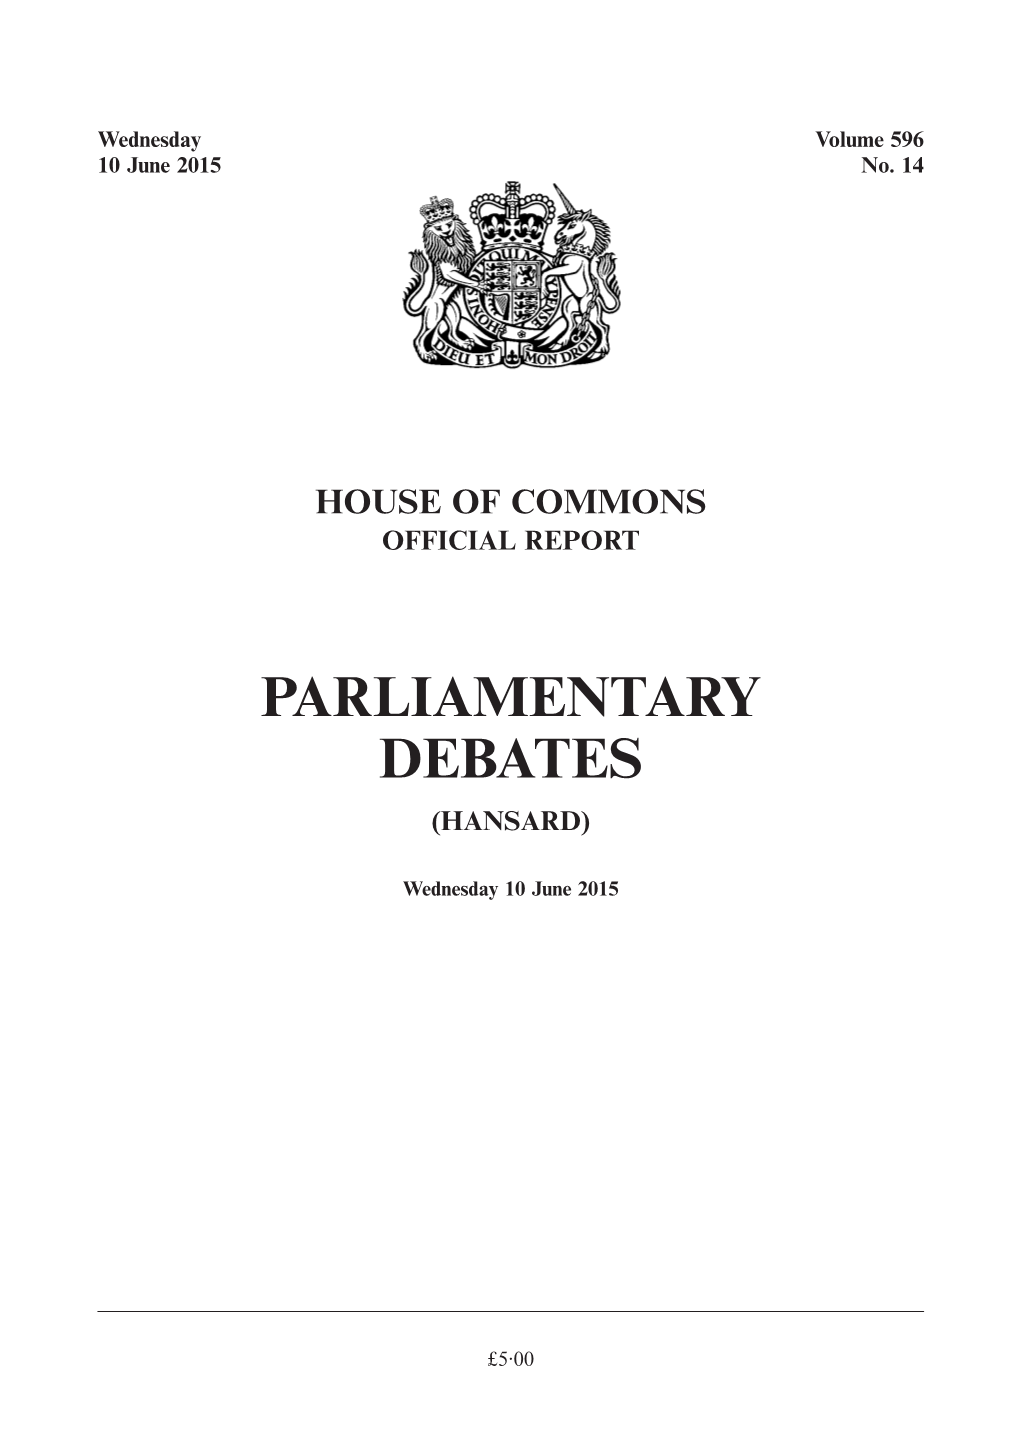 Whole Day Download the Hansard Record of the Entire Day in PDF Format. PDF File, 0.75